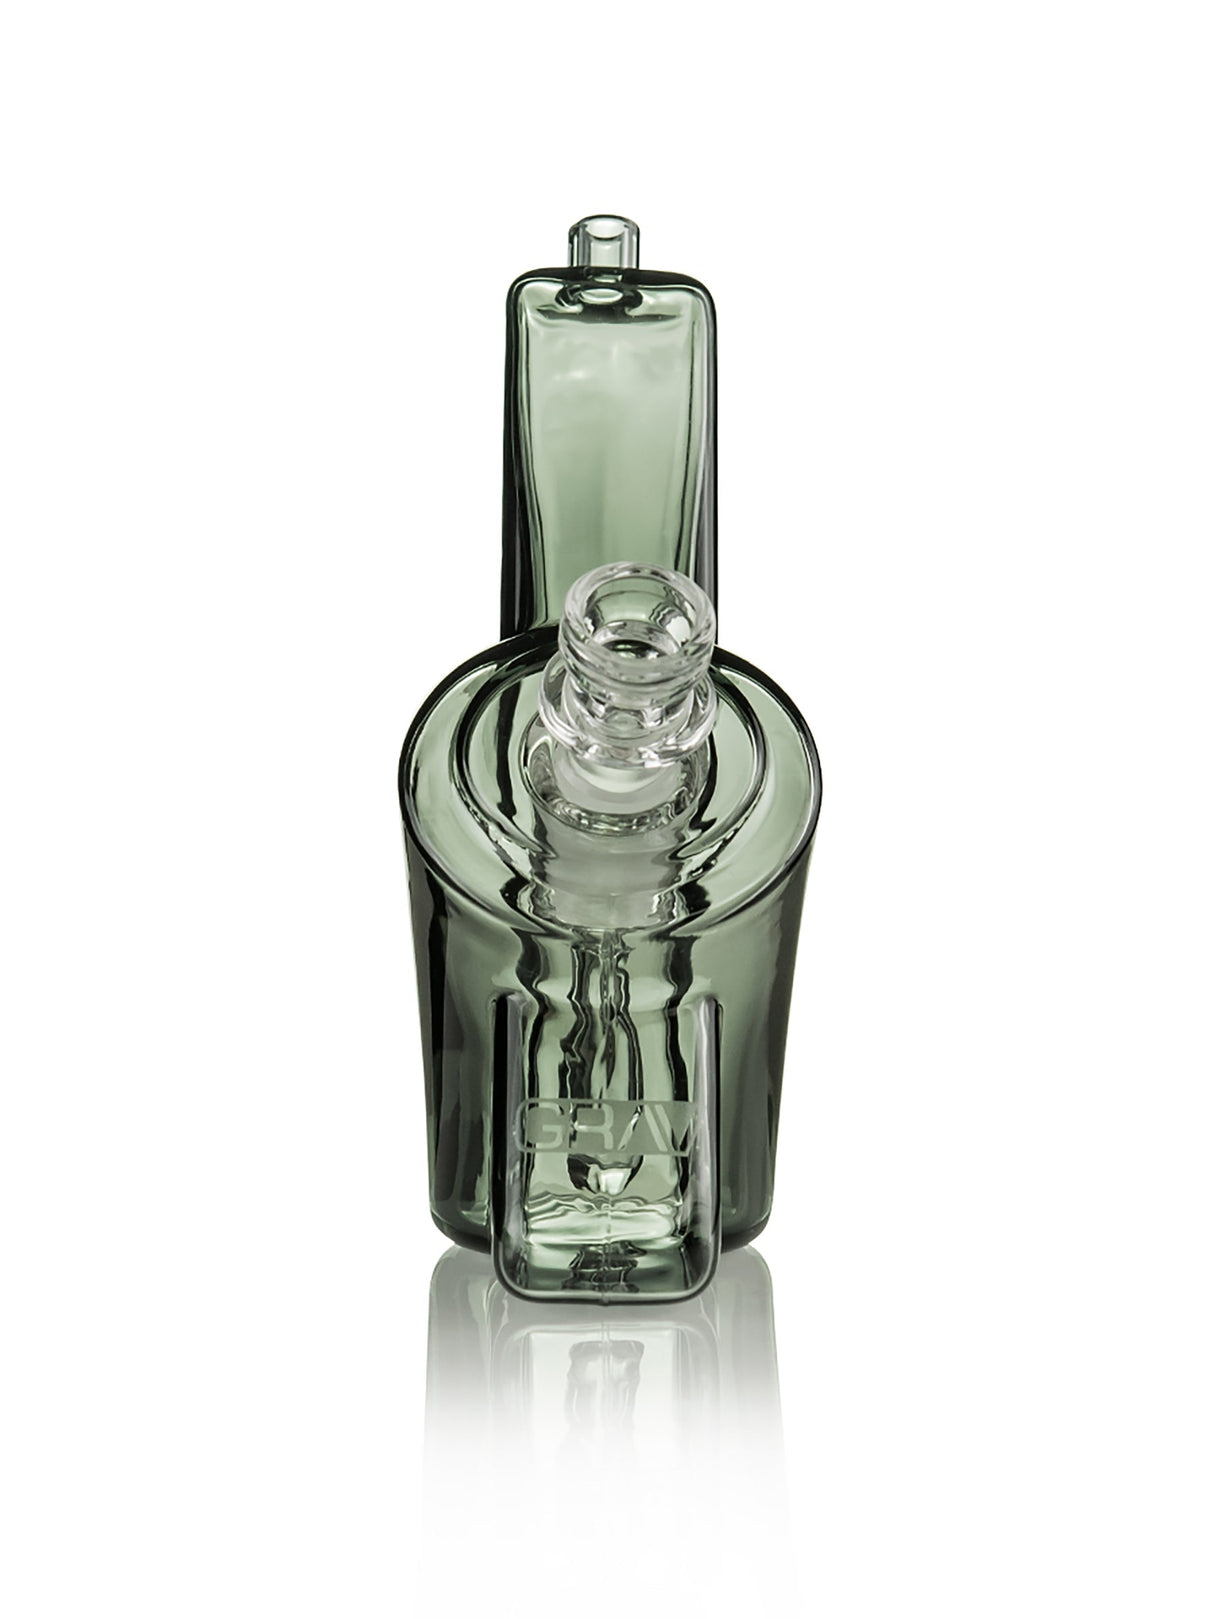 GRAV Wedge Bubbler in Smoke - Front View on Seamless White Background